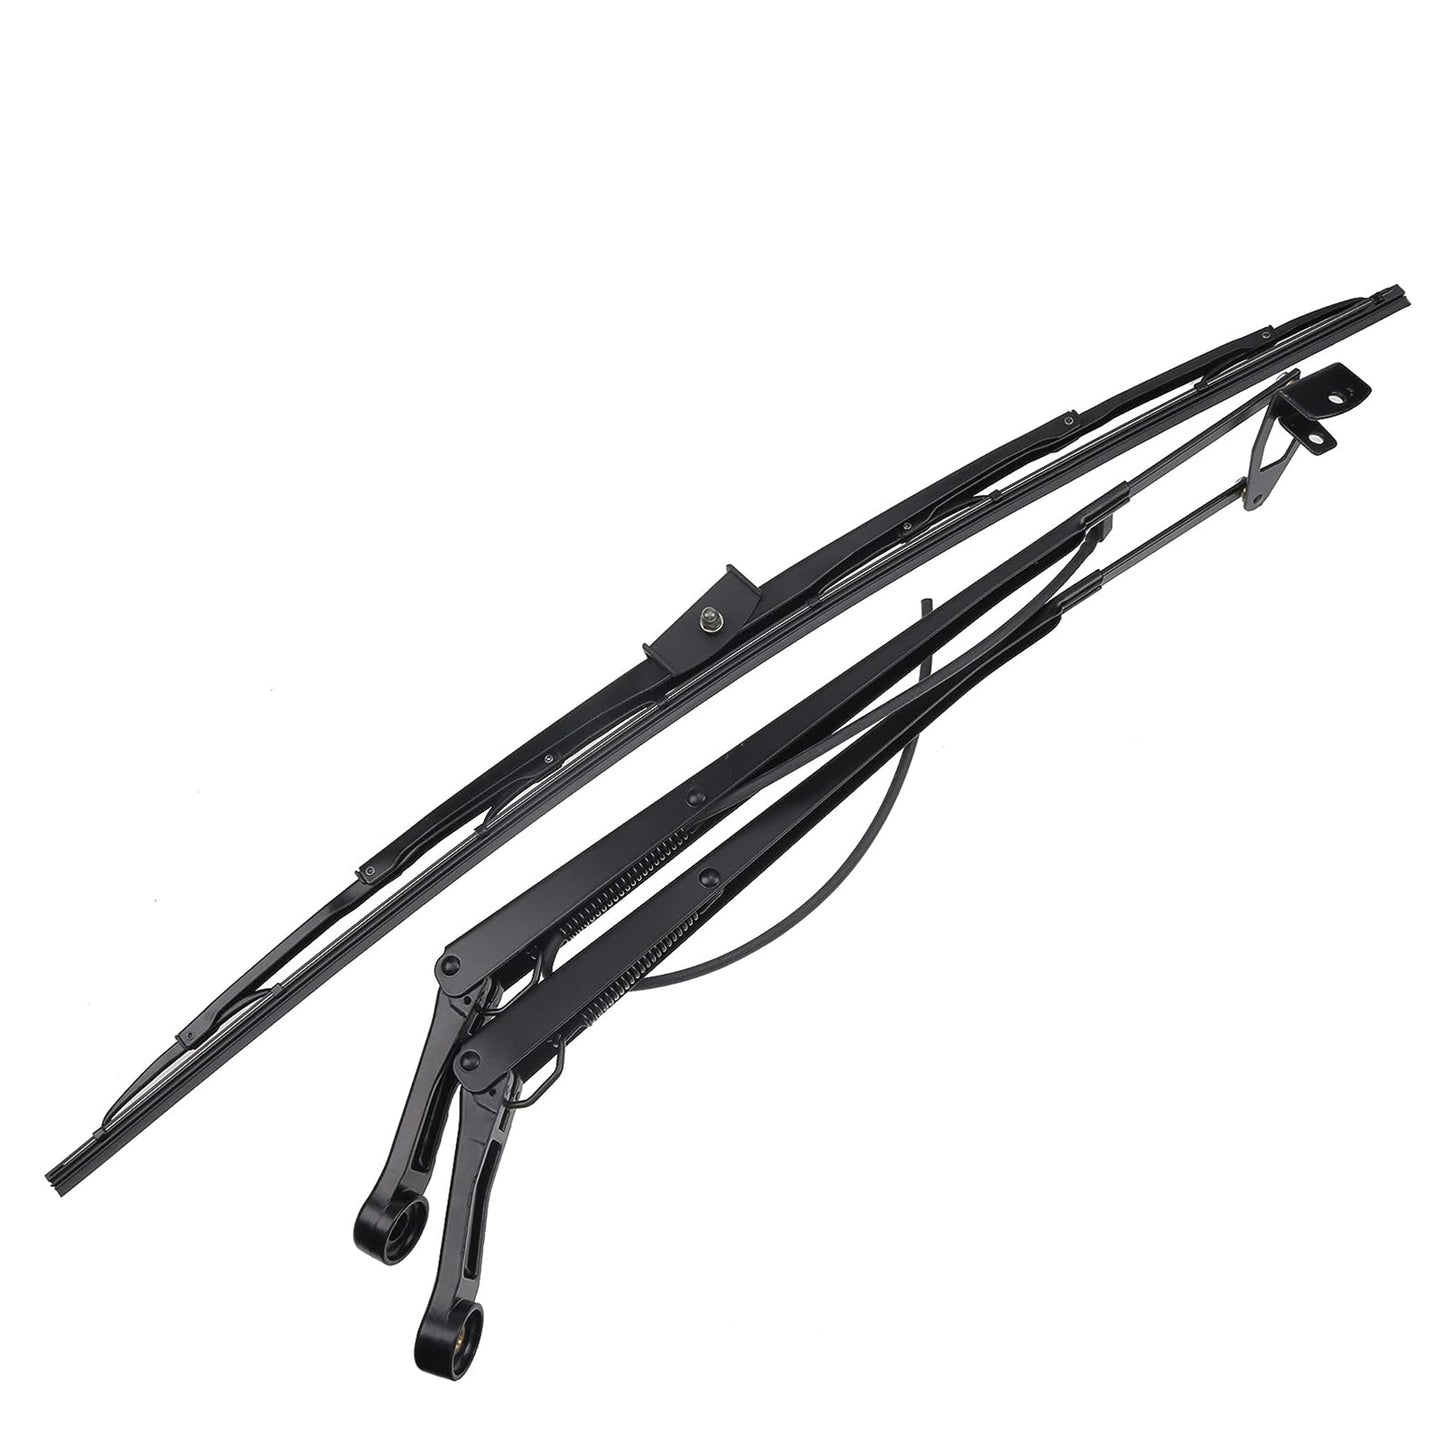 7168953 7168954 Wiper Arm & Wiper Blade Compatible with Bobcat S650 S740 S750 S770